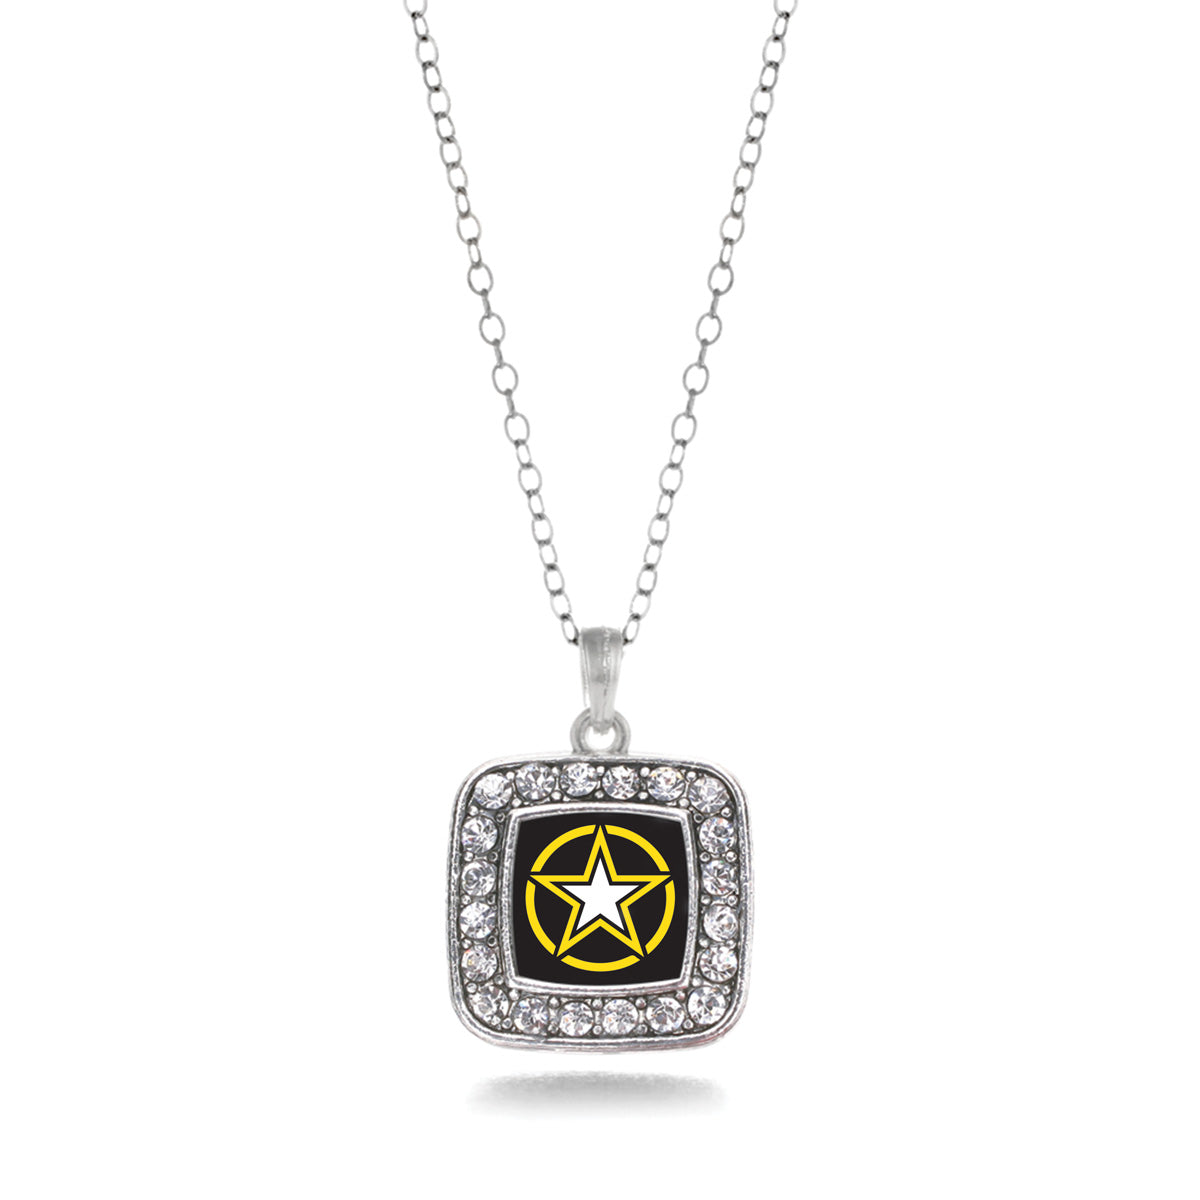 Silver Army Star Square Charm Classic Necklace